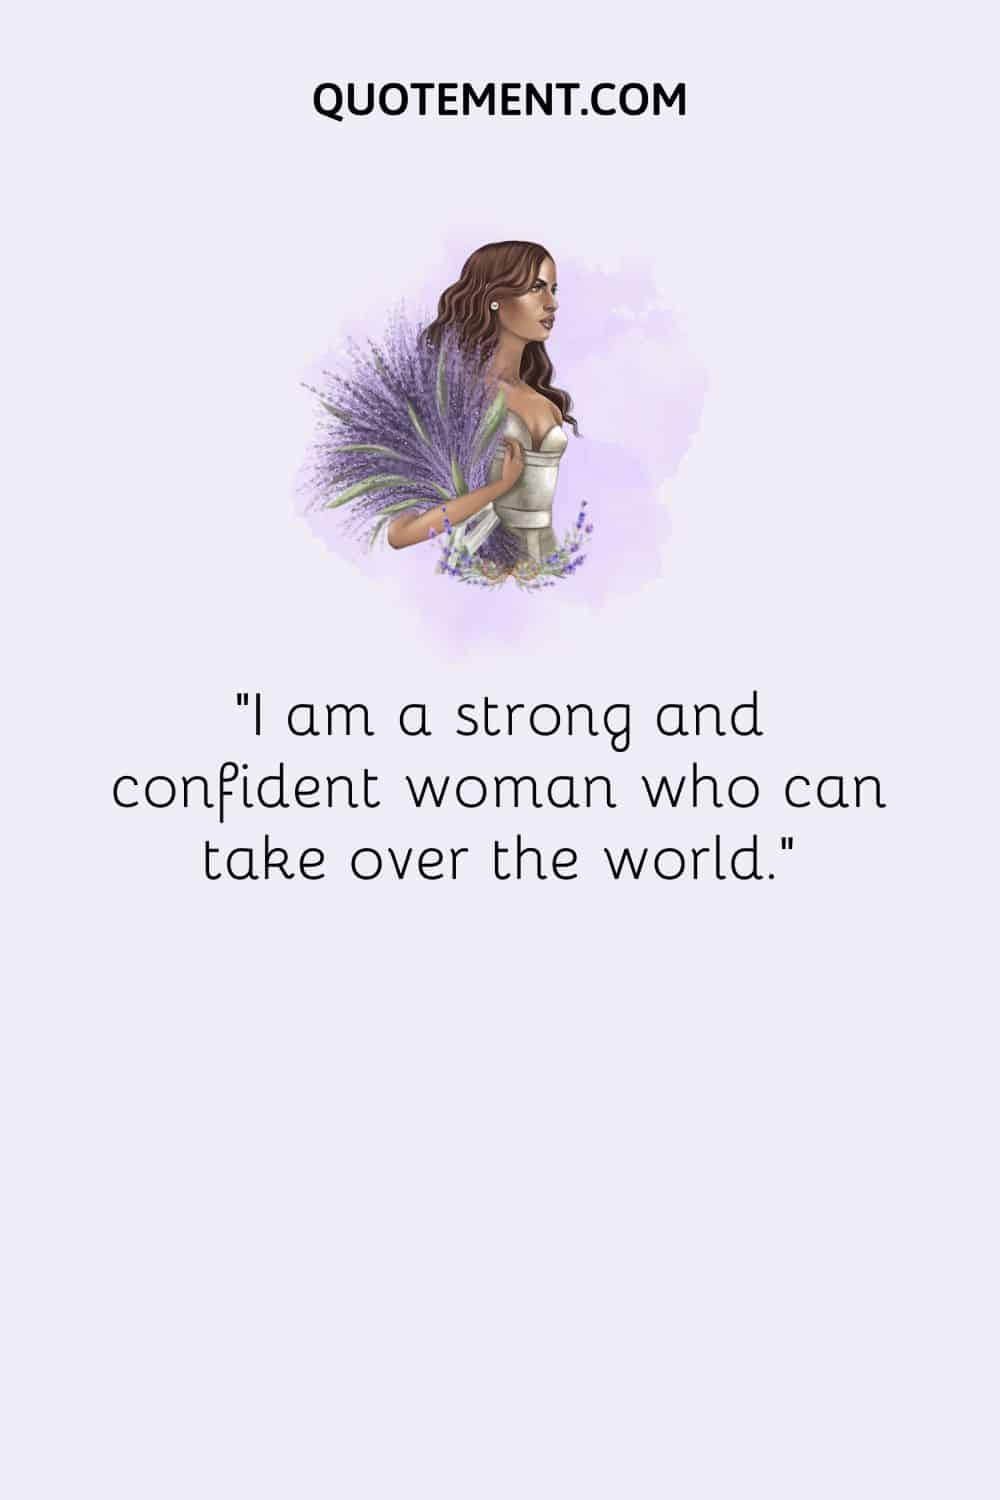 I am a strong and confident woman who can take over the world